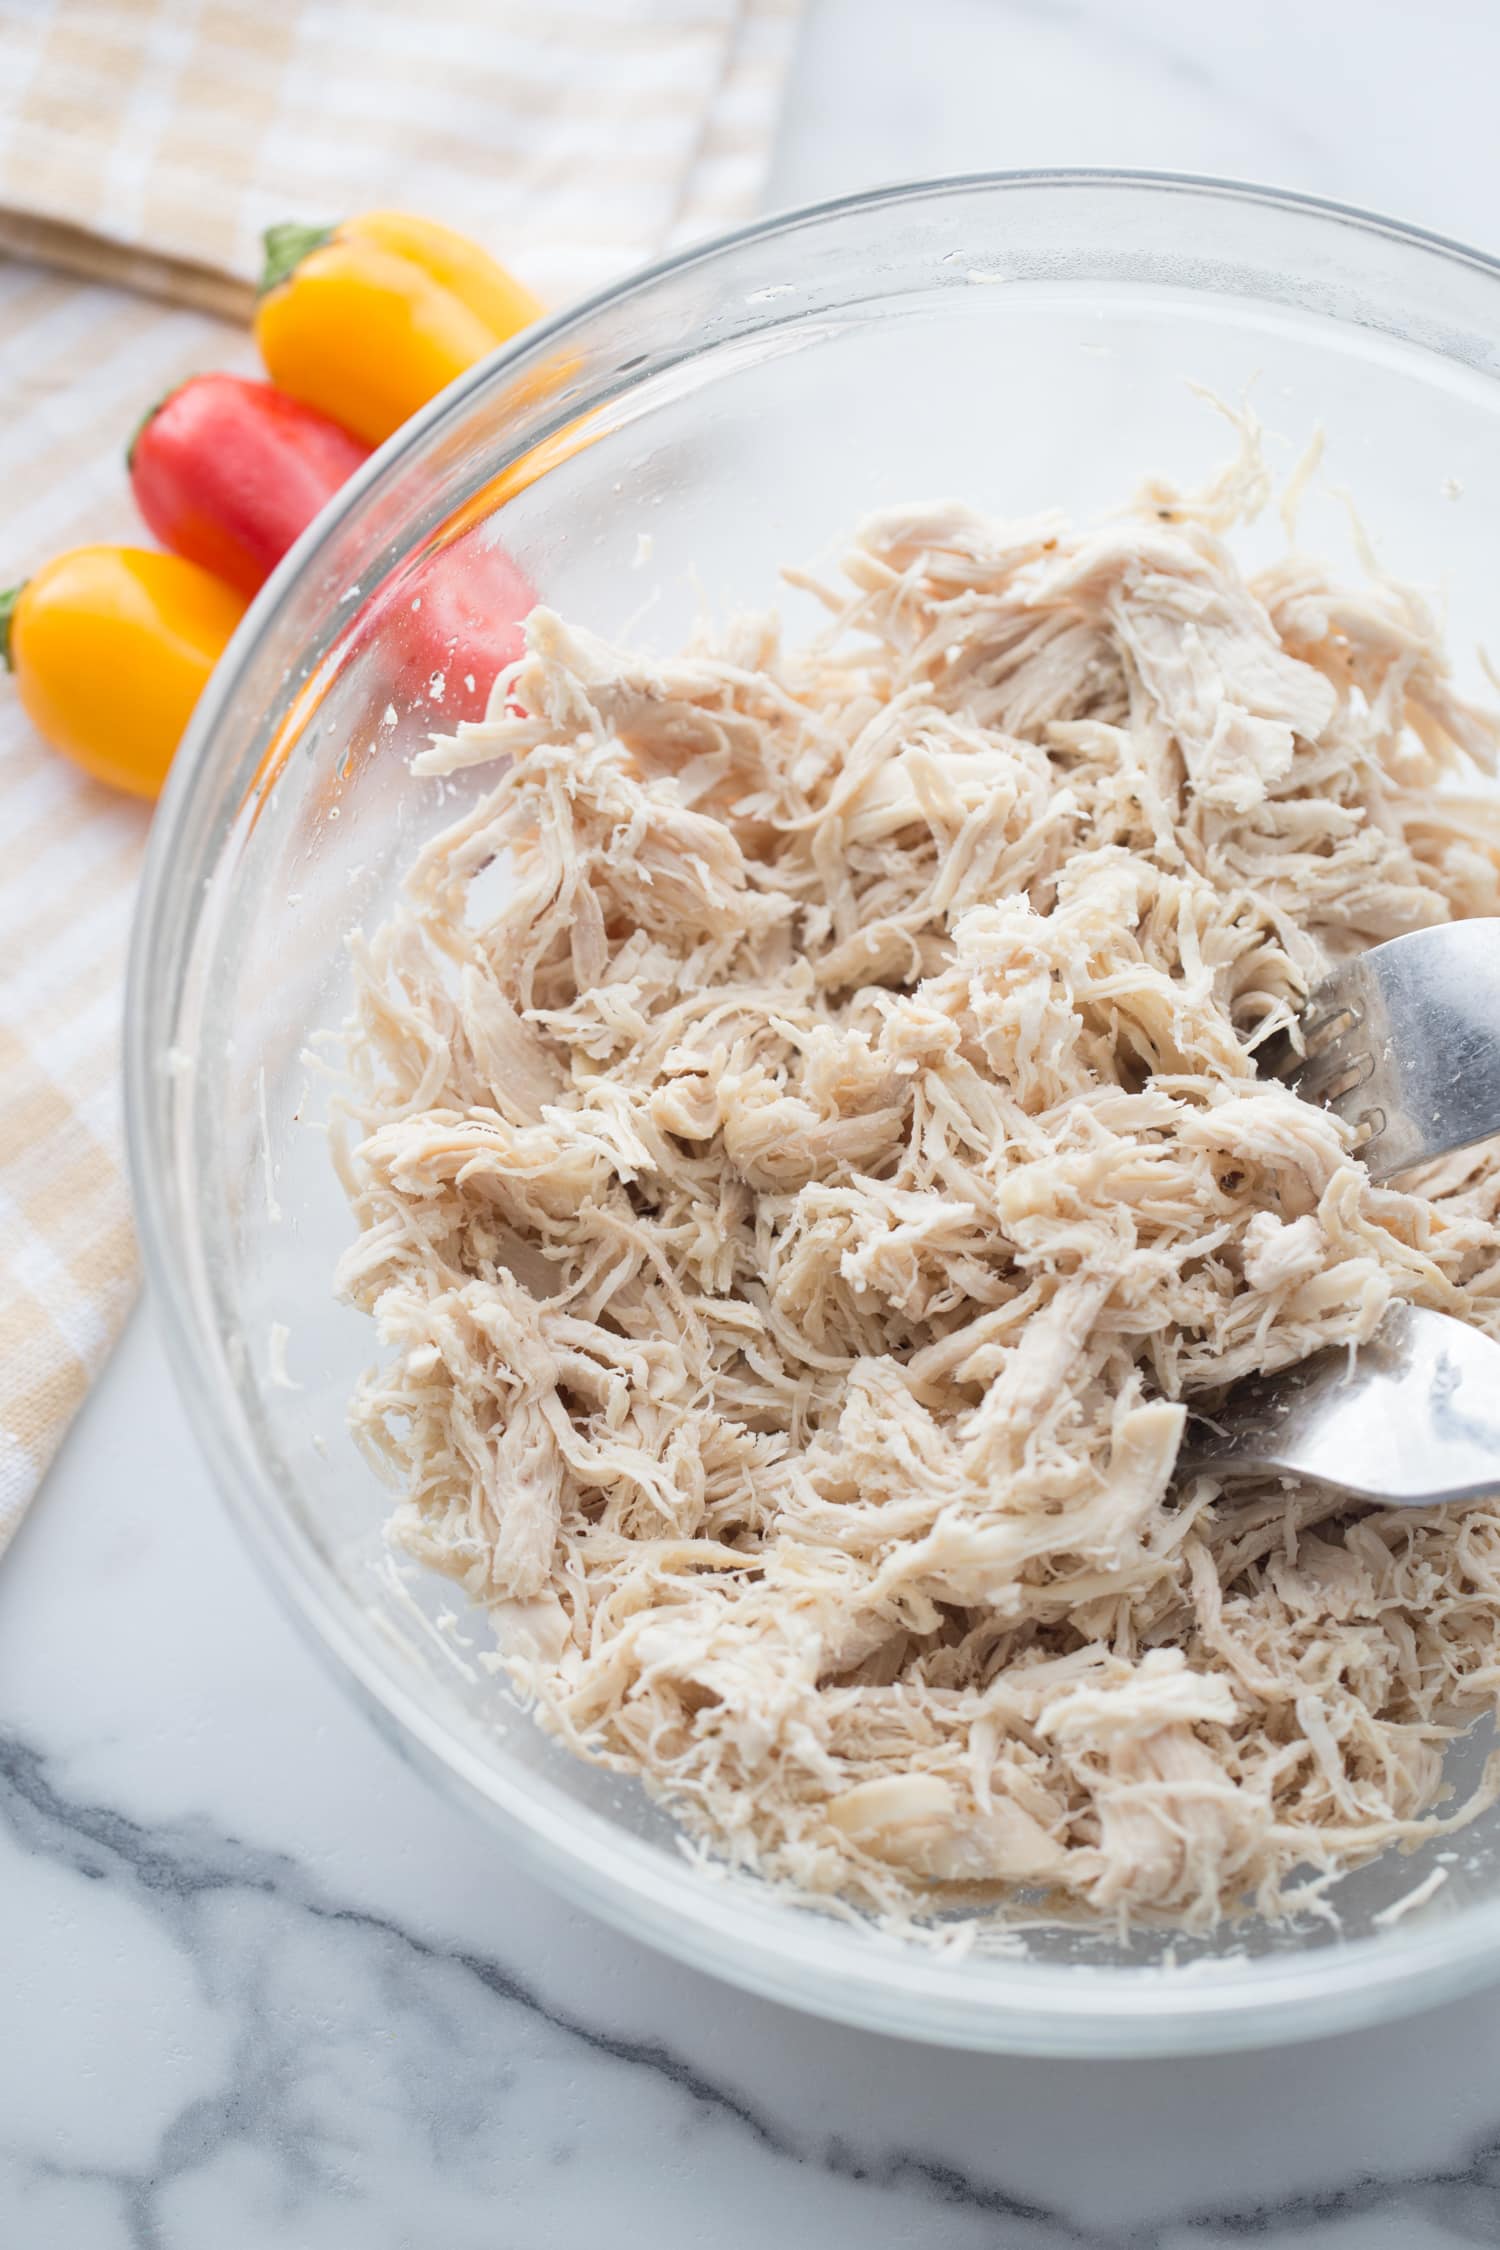 Shredded chicken in a glass bowl with two forks, mini bell peppers are in the background